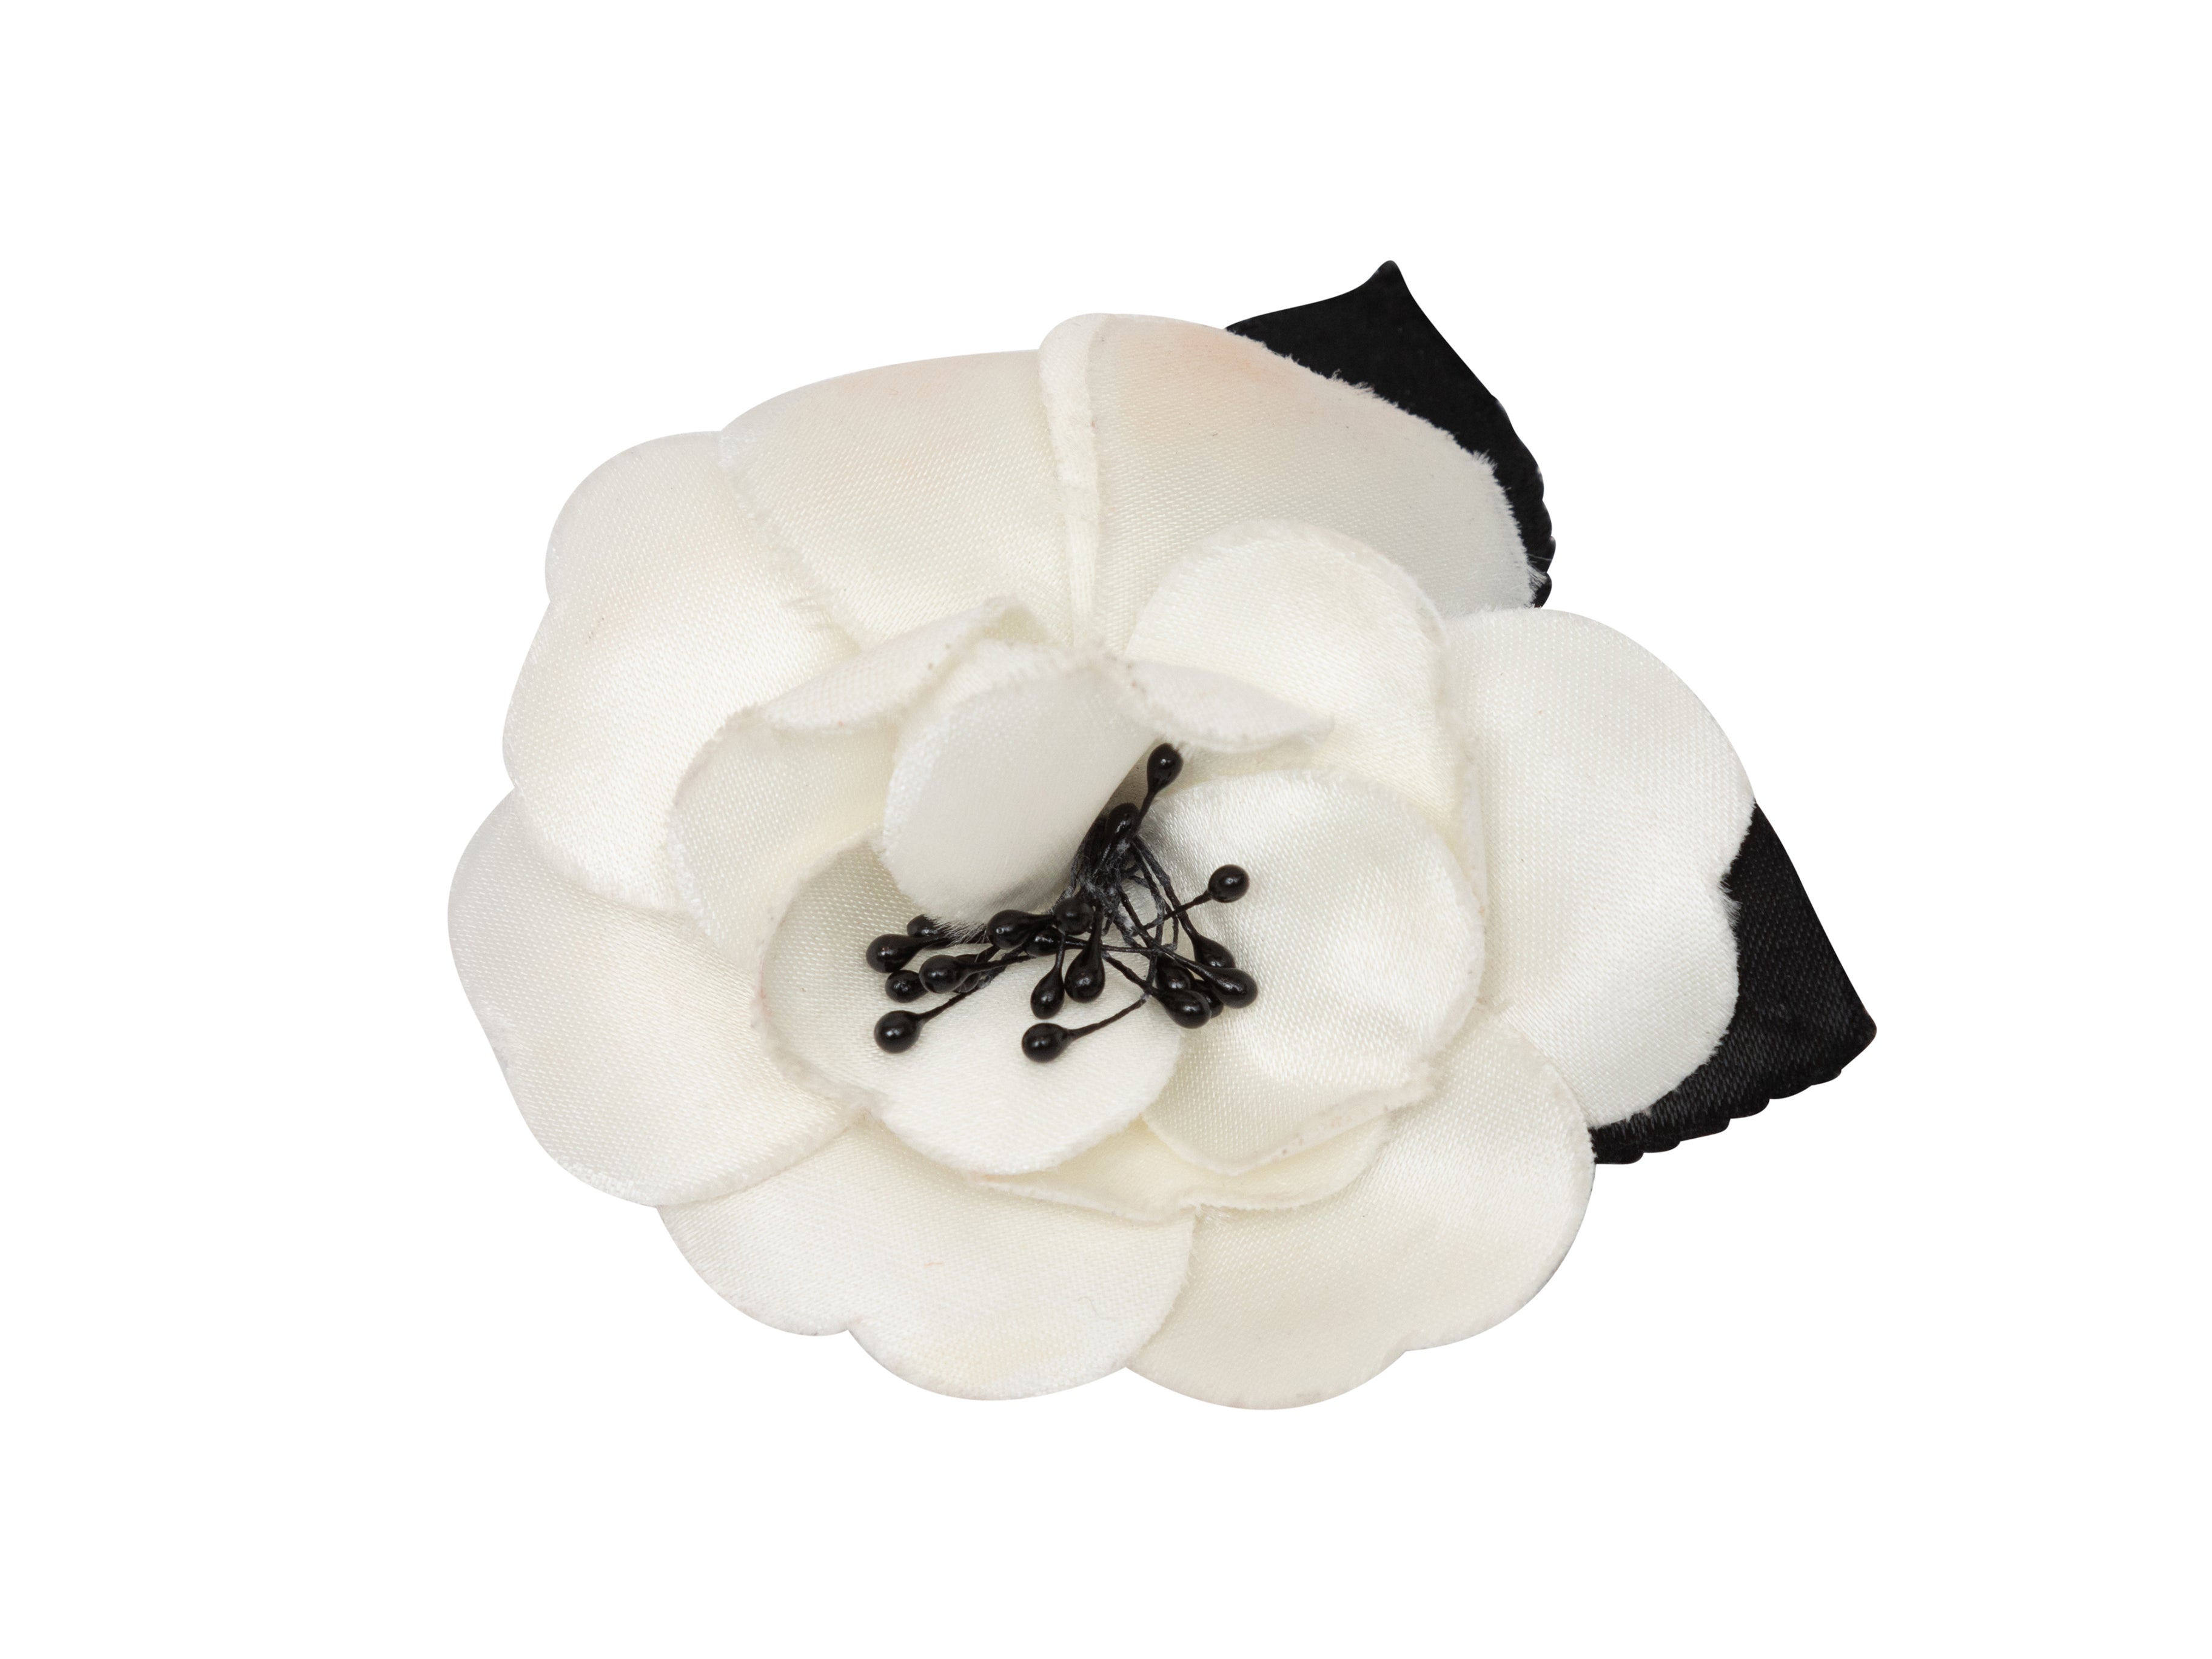 Chanel Camellia Brooch – Flower Moon Boutique